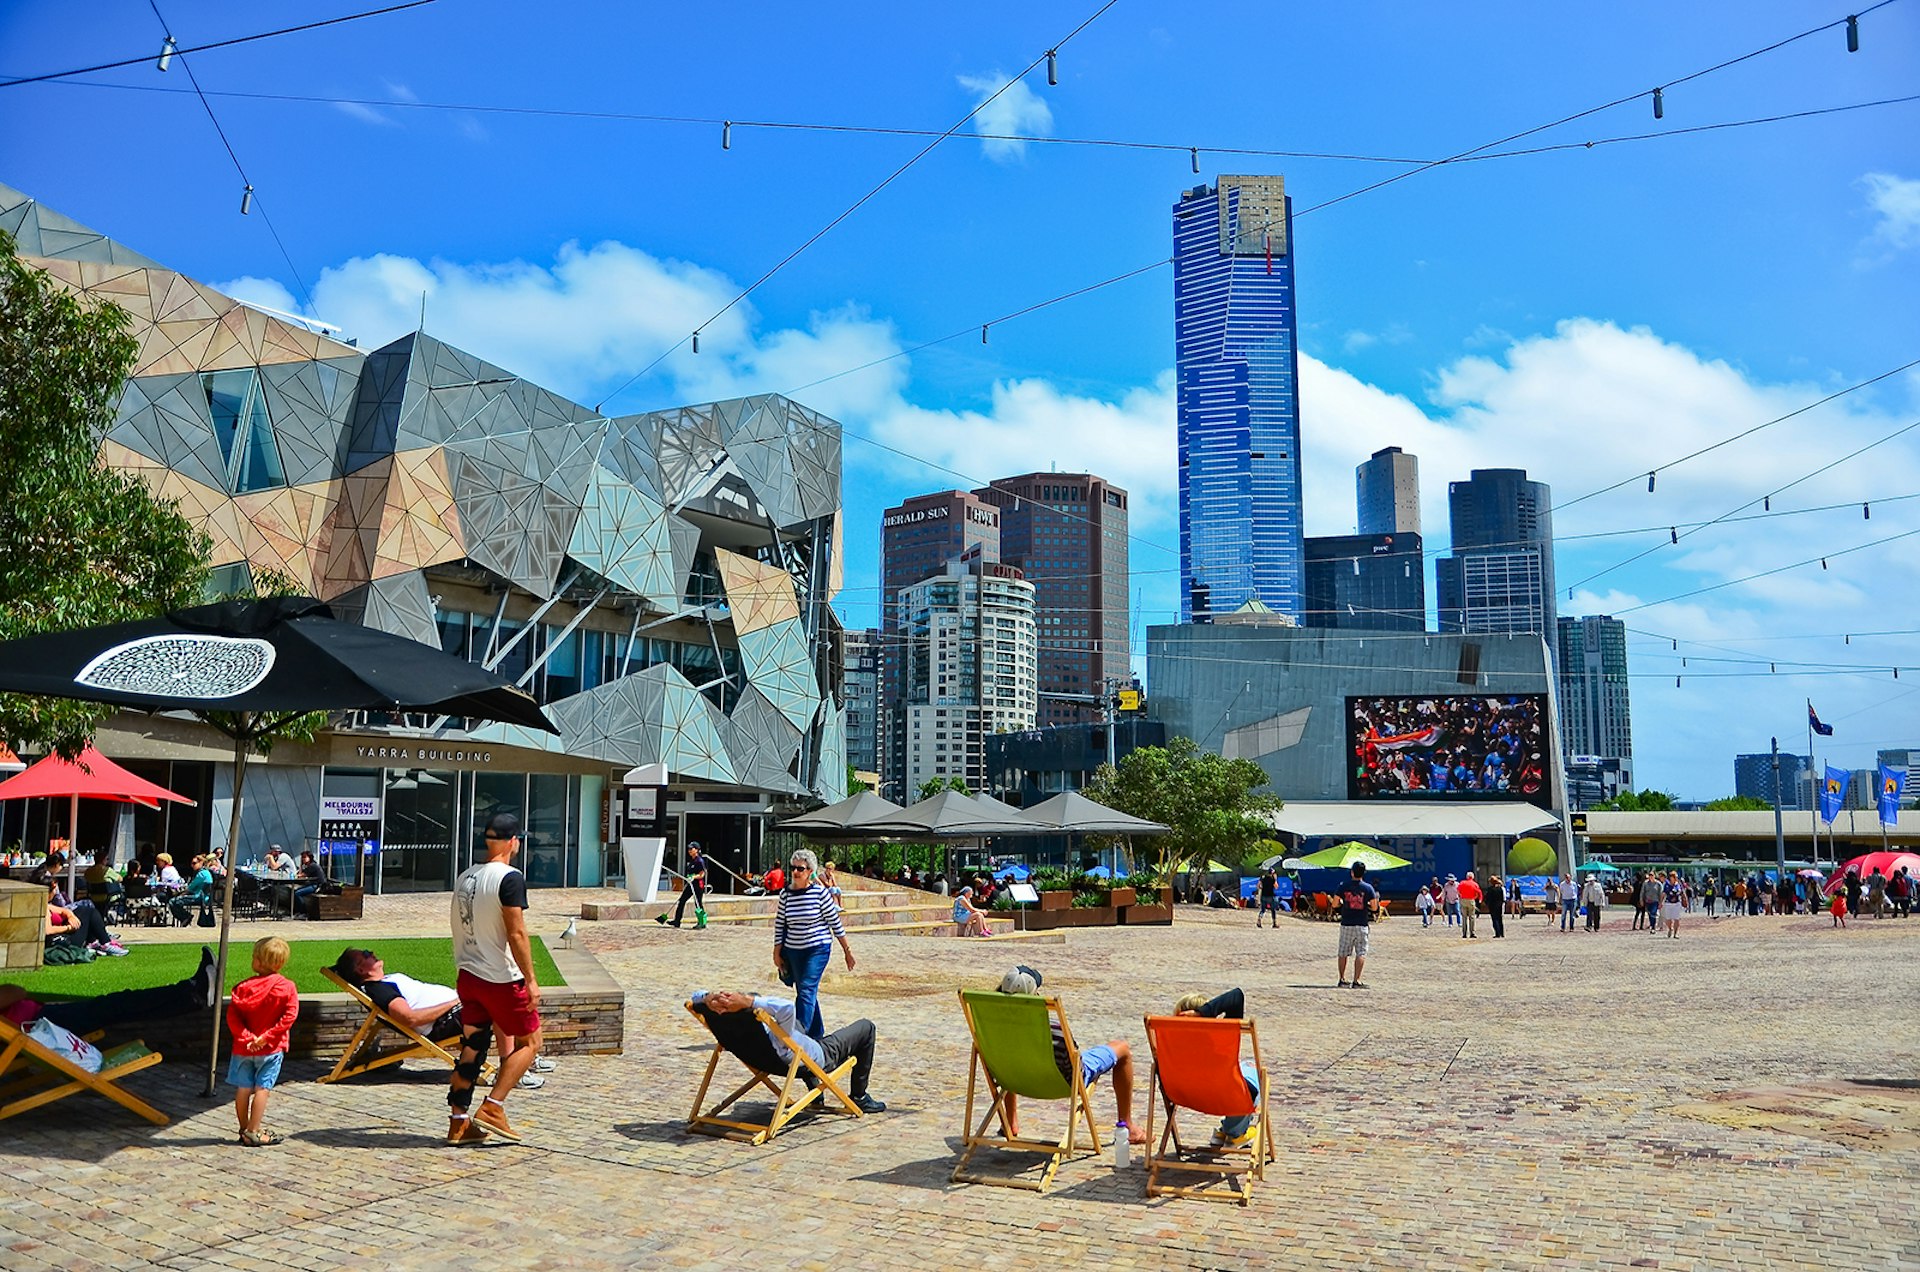 Tourists sit in multicolor sun chairs in Federation Square. A modern architecture building is visible as well as a skyline of business towers. Melbourne, Australia.